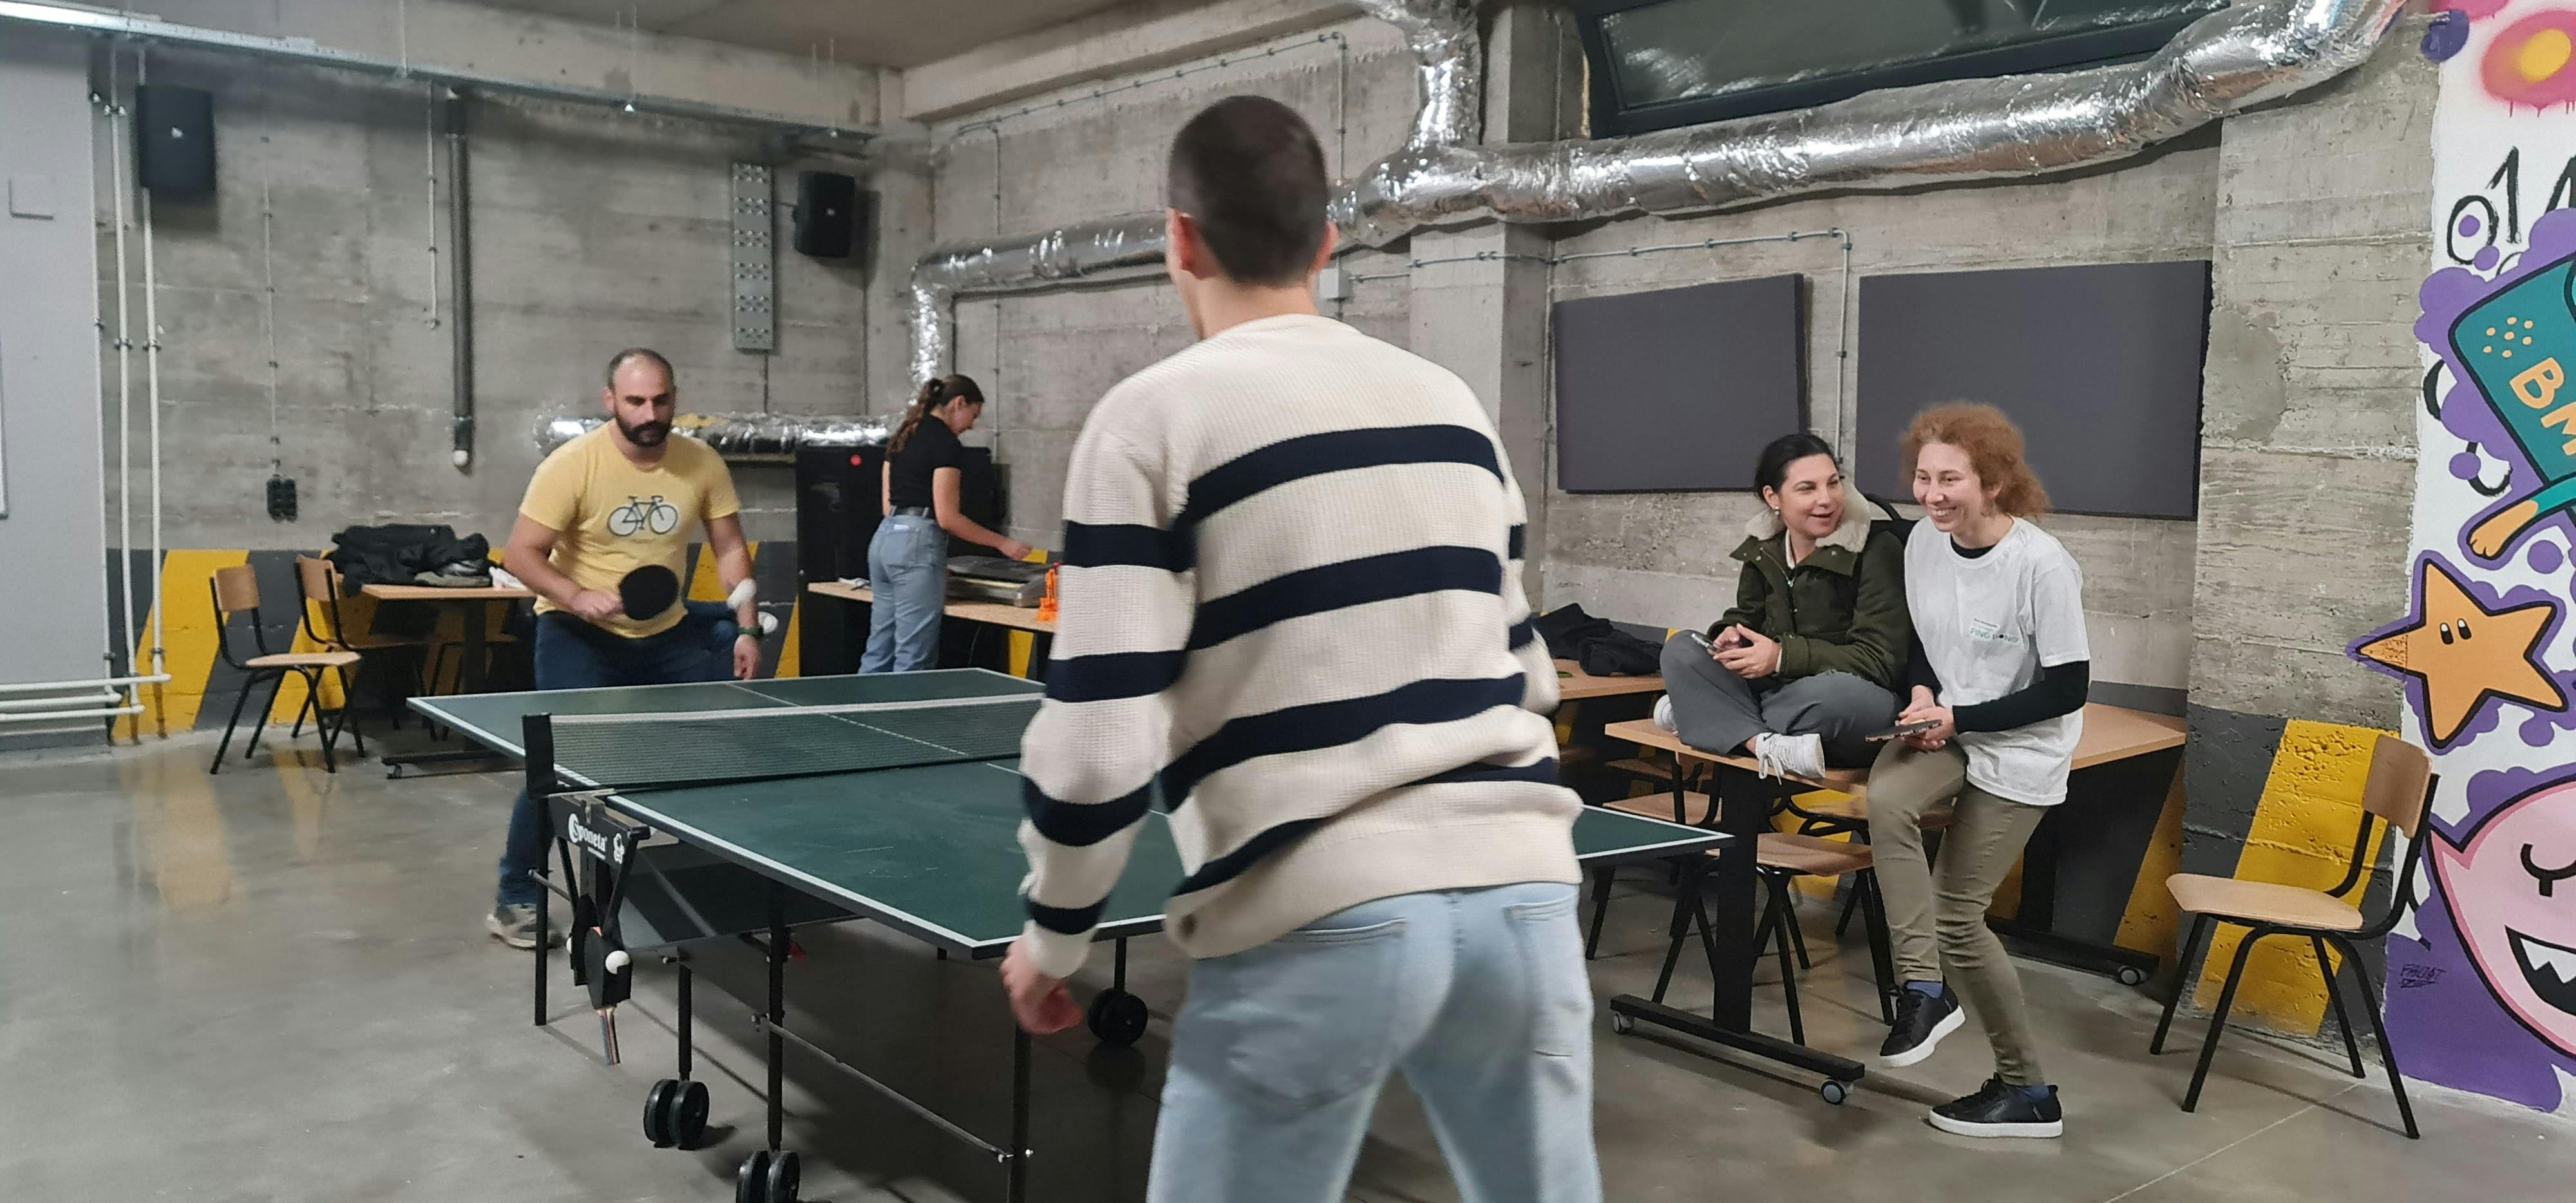 This image contains two players playing ping-pong on a table. There is one person standing behind them and two persons having a conversation. The area is filled with chairs and desks. 